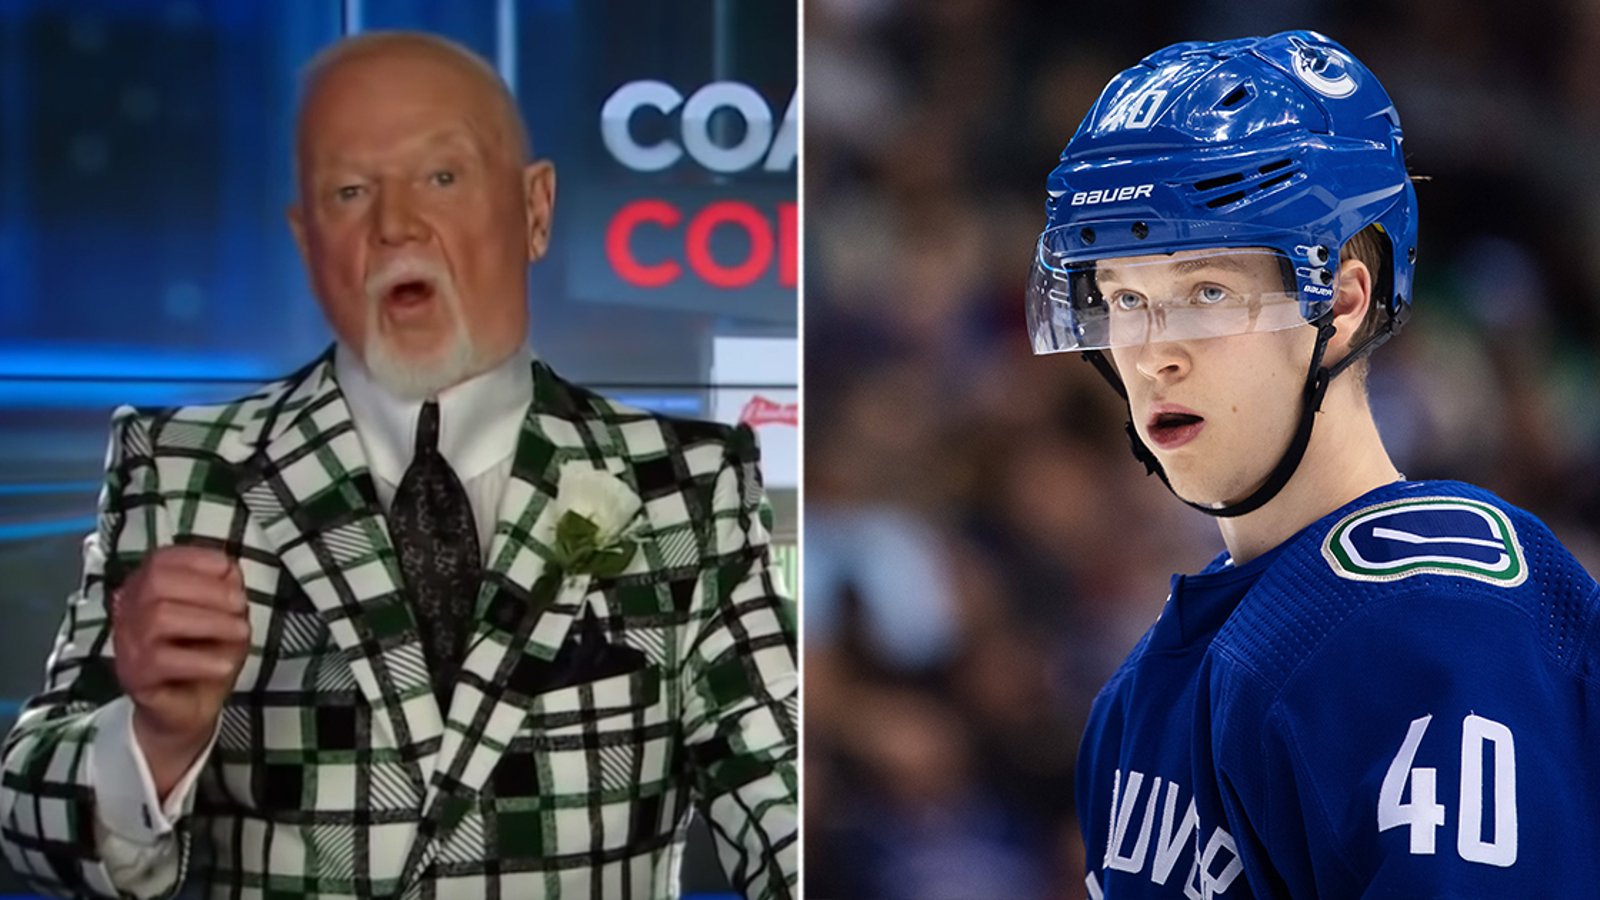 Don Cherry tears a strip off Canucks rookie Pettersson, pumps up Leafs' Marner